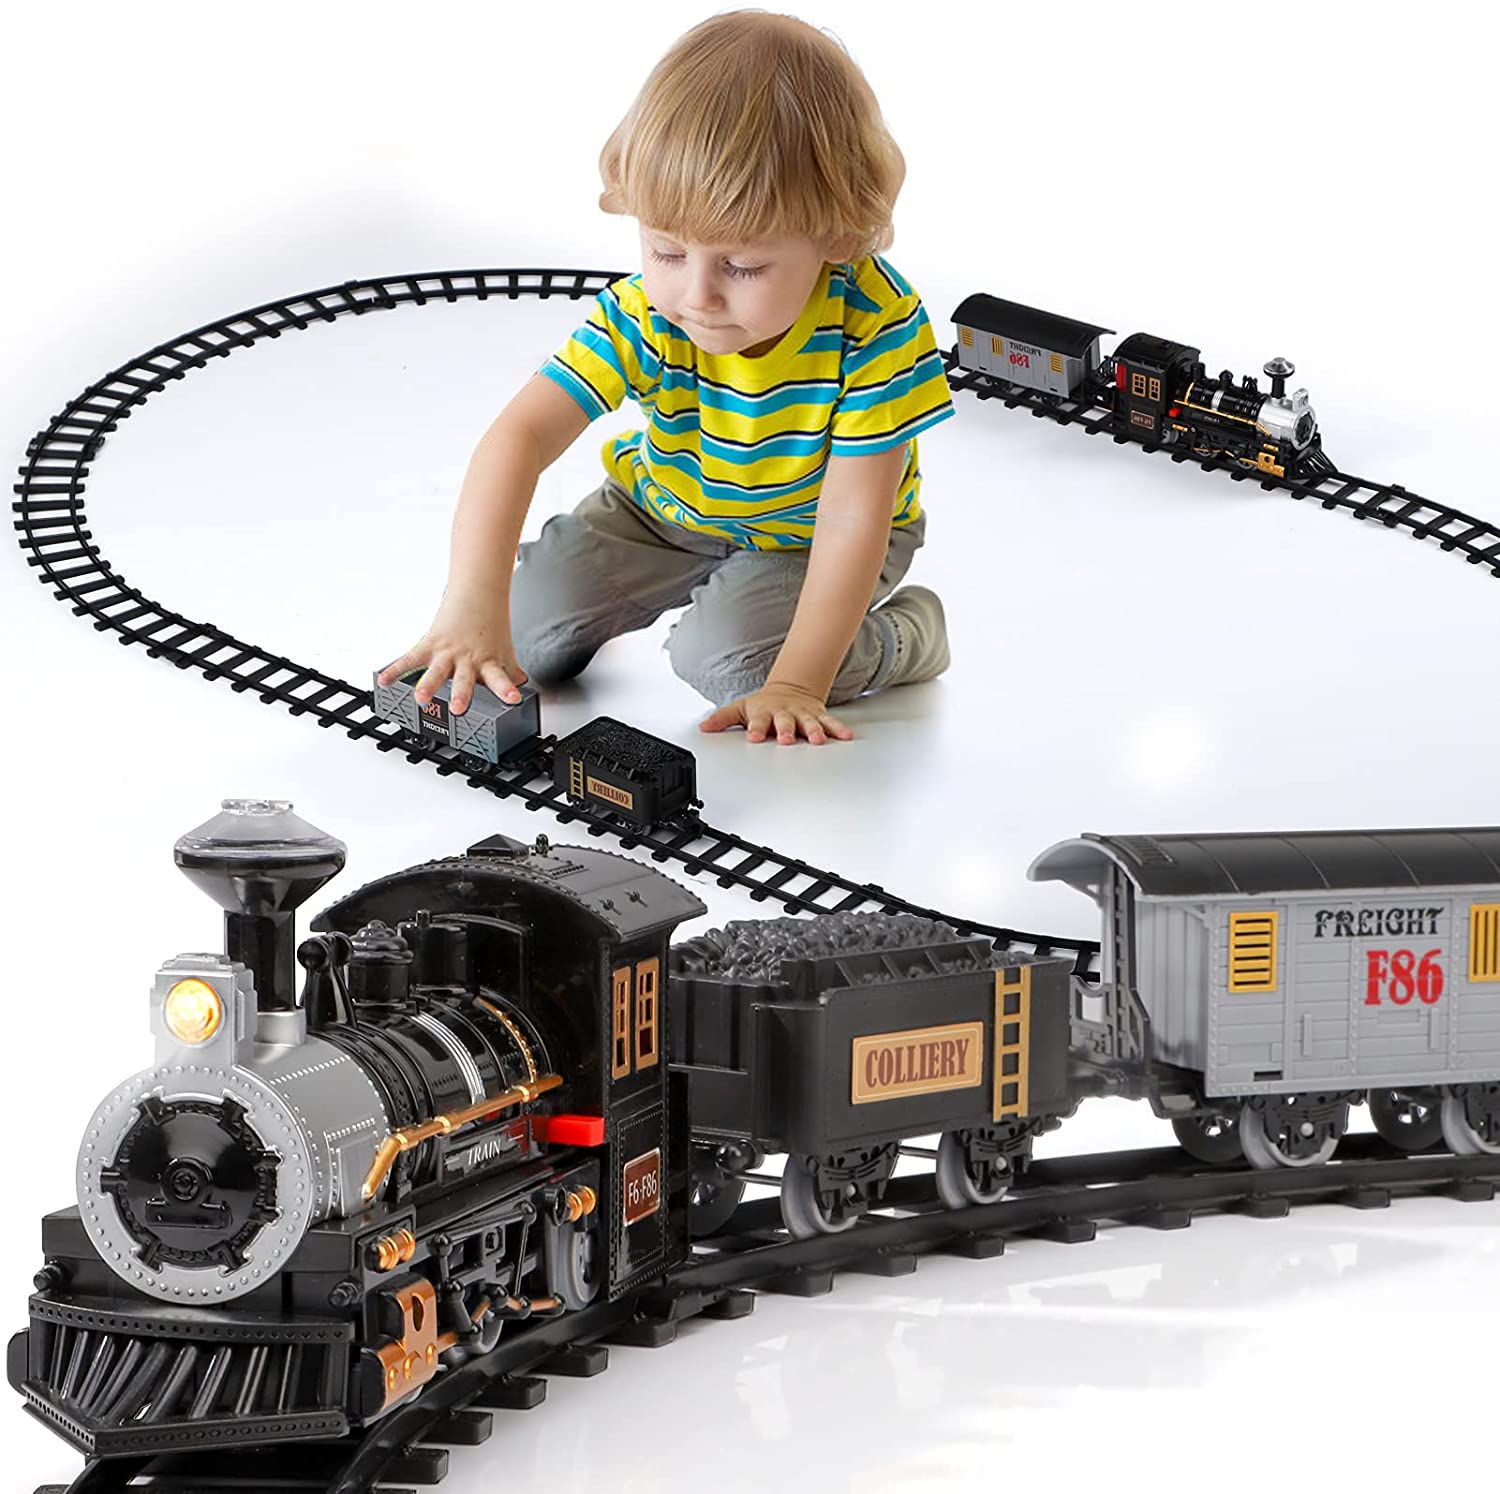 Lucky Doug Battery Operated Non-Toxic Plastic Electric Train Set For Kids